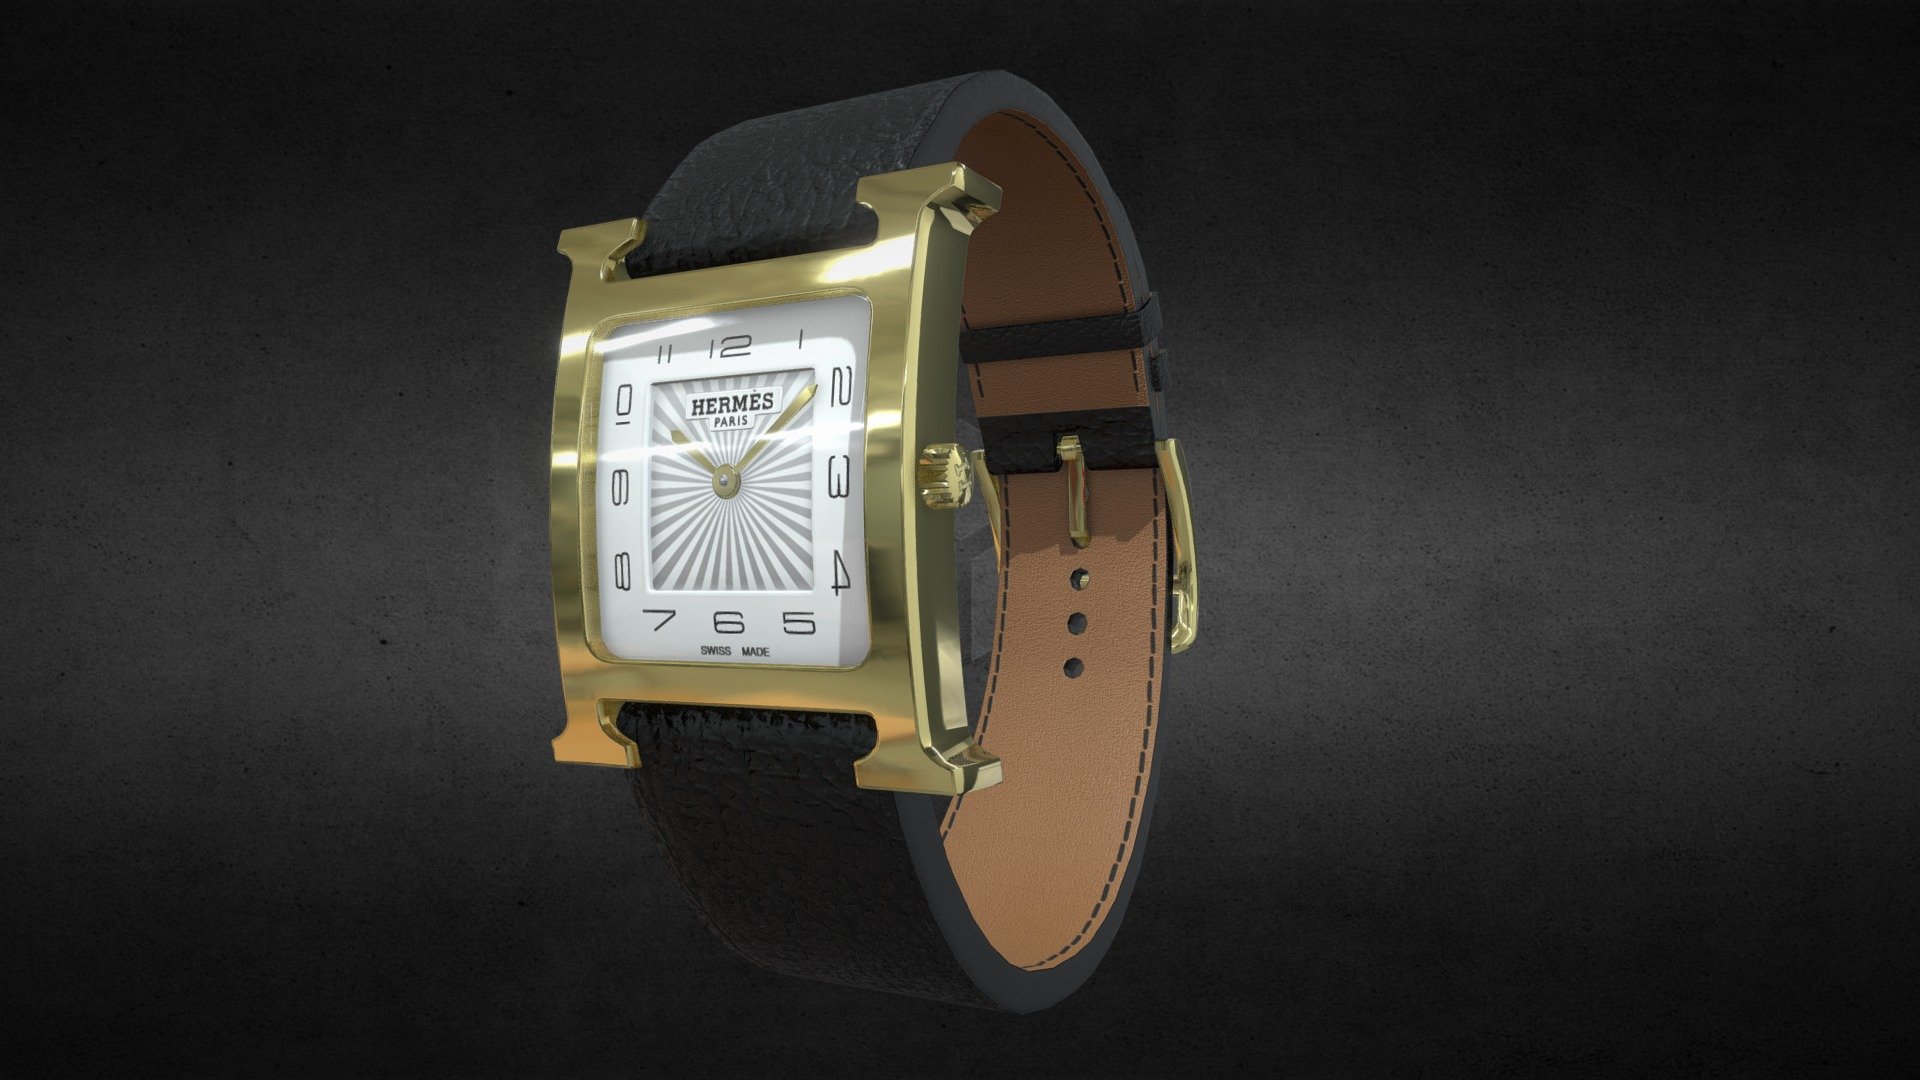 Awesome stainless steel Heure H watch 26x26mm Watch․
Use for Unreal Engine 4 and Unity3D. Try in augmented reality in the AR-Watches app. 
Links to the app: Android, iOS

Currently available for download in FBX format.

3D model developed by AR-Watches

Disclaimer: We do not own the design of the watch, we only made the 3D model 3d model